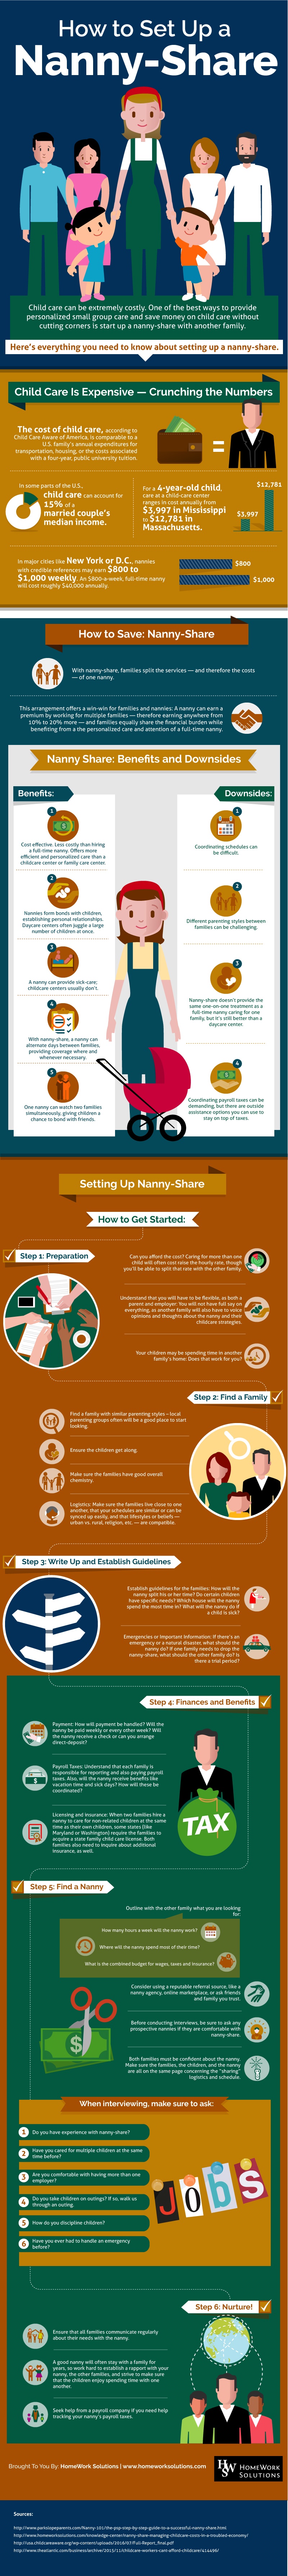 1608_ig_home-work-solutions_how-to-nanny-share_v2.jpg